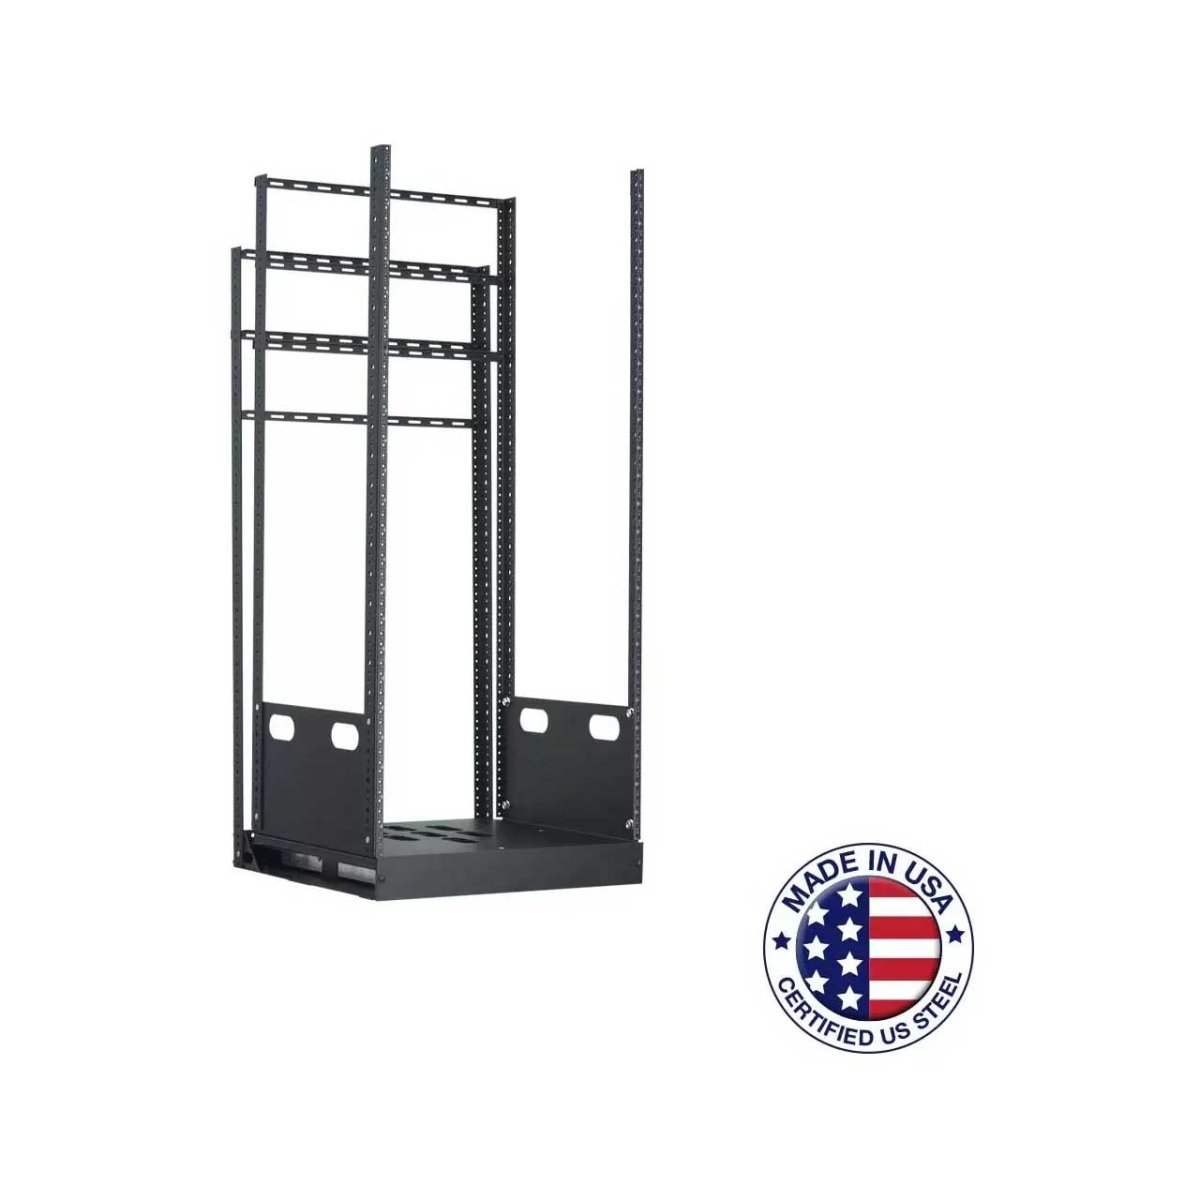 Picture of Lowell Manufacturing LMC-LPTR4-2419 LPTR4-2419 24RU Pull & Turn Millwork Rack with Four Support Rails - 19 in. Deep